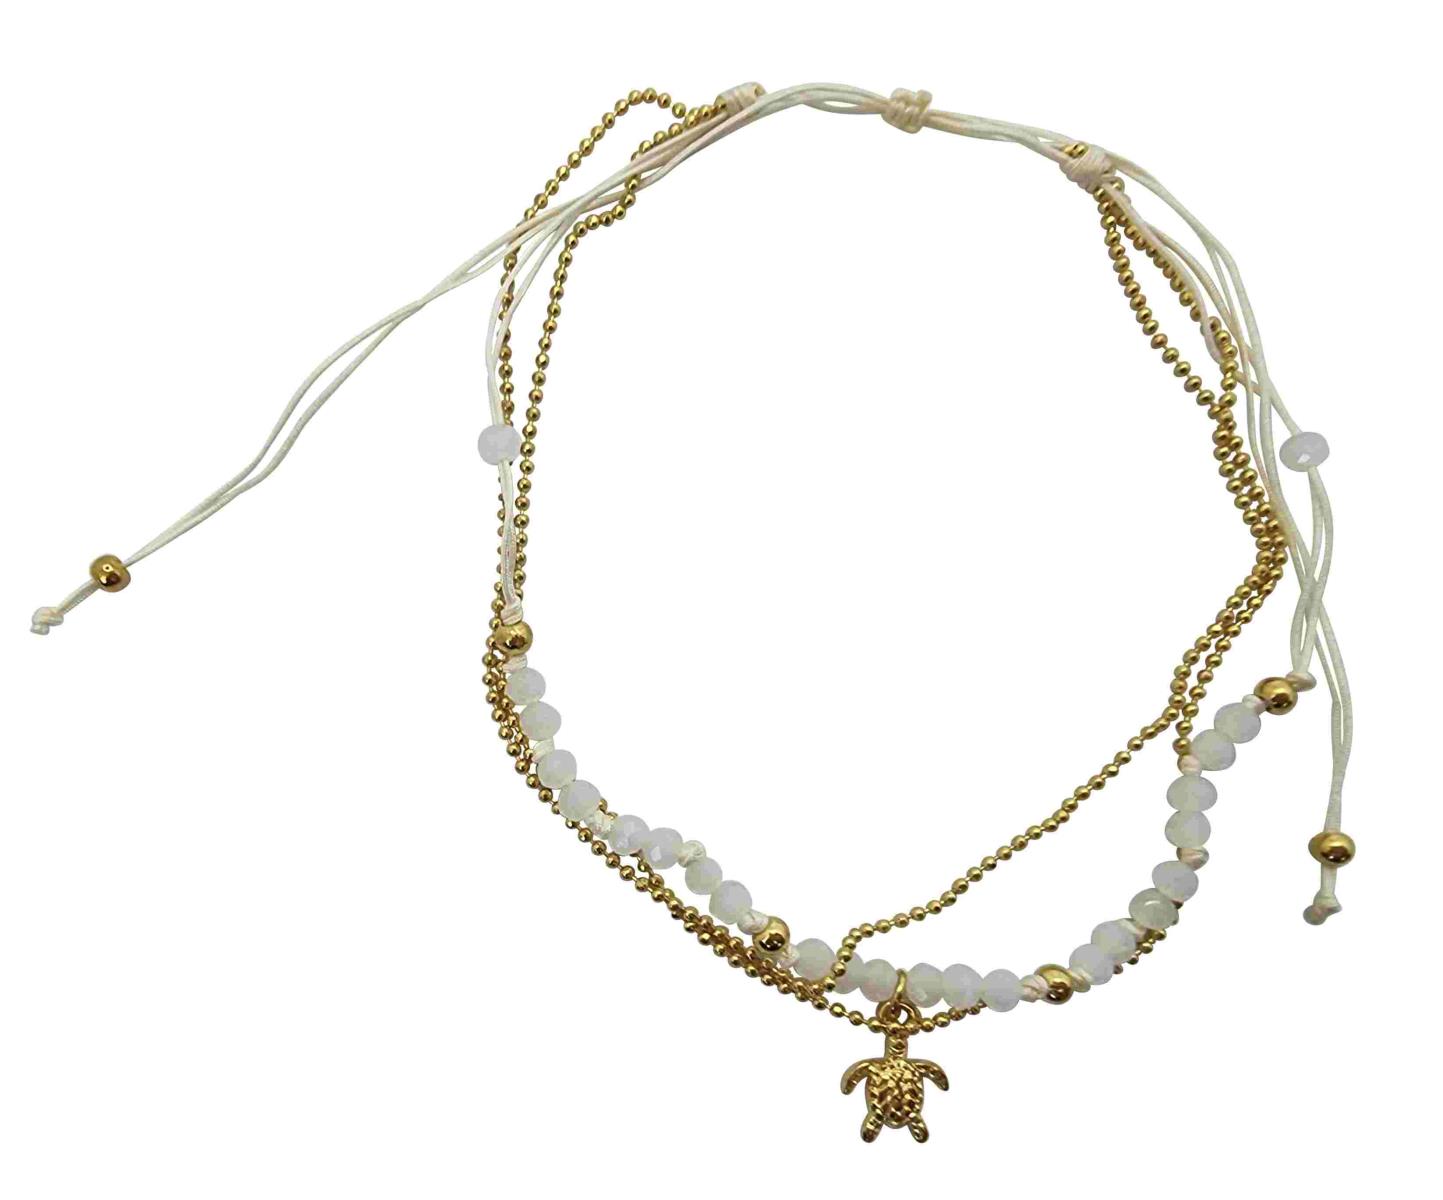 A219 Anklet  double cords,beads  gold colourded metal chain and charms